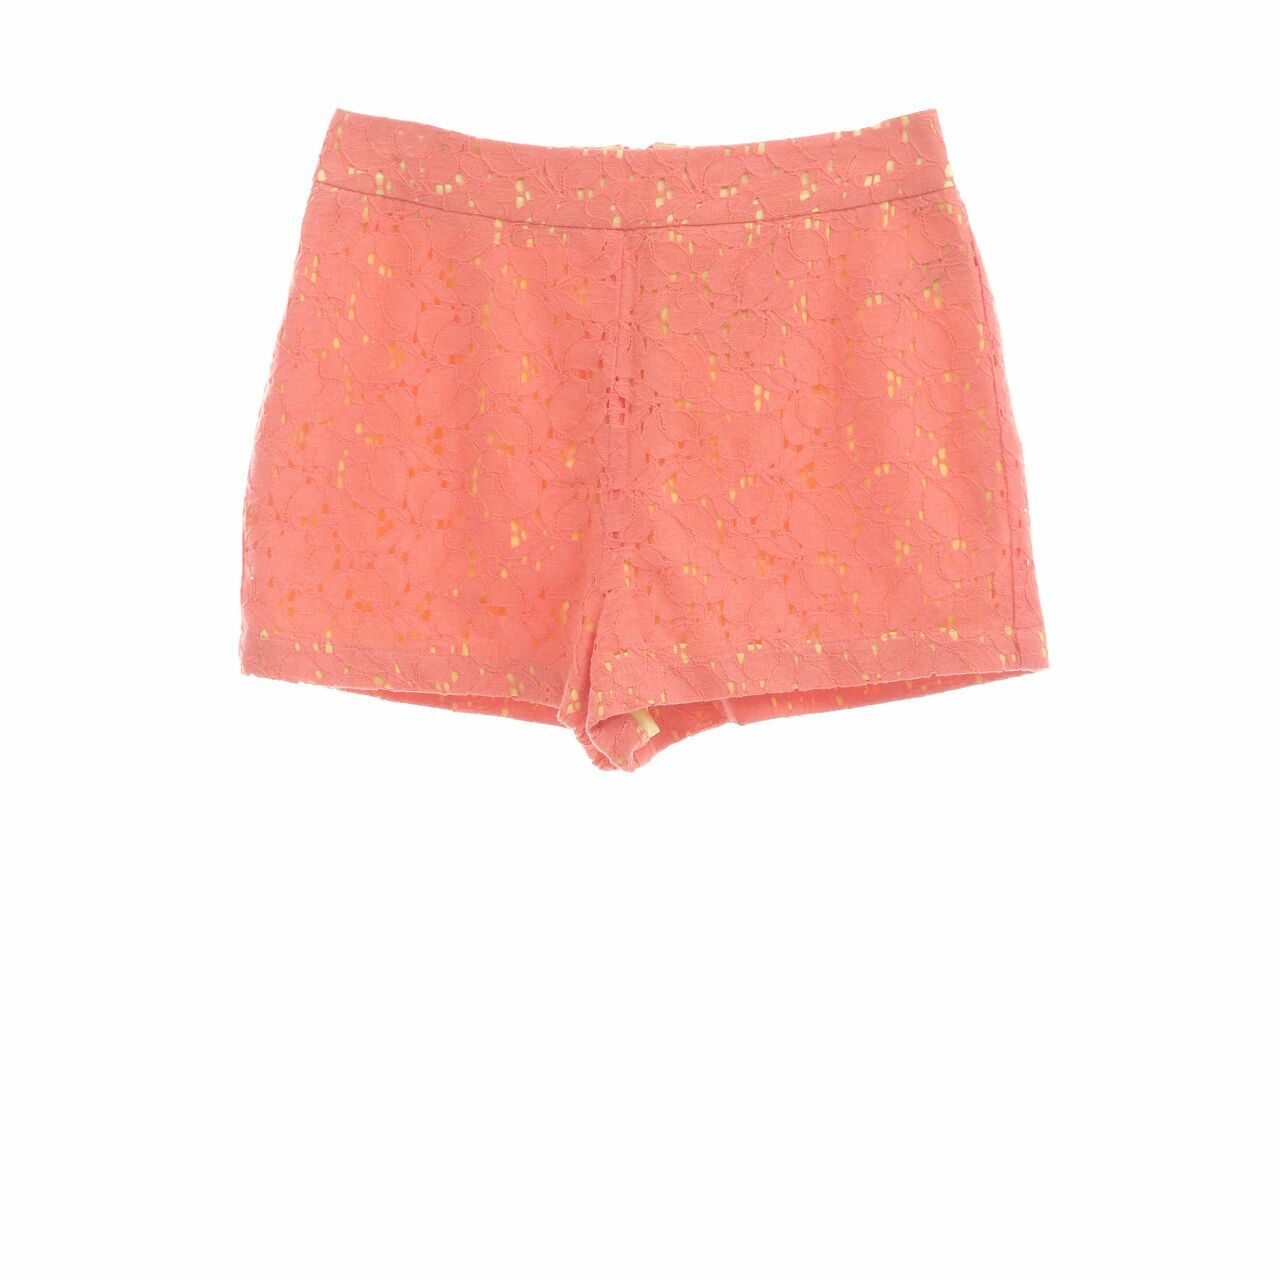 Forever 21 Pink Coral Lace Short Pants